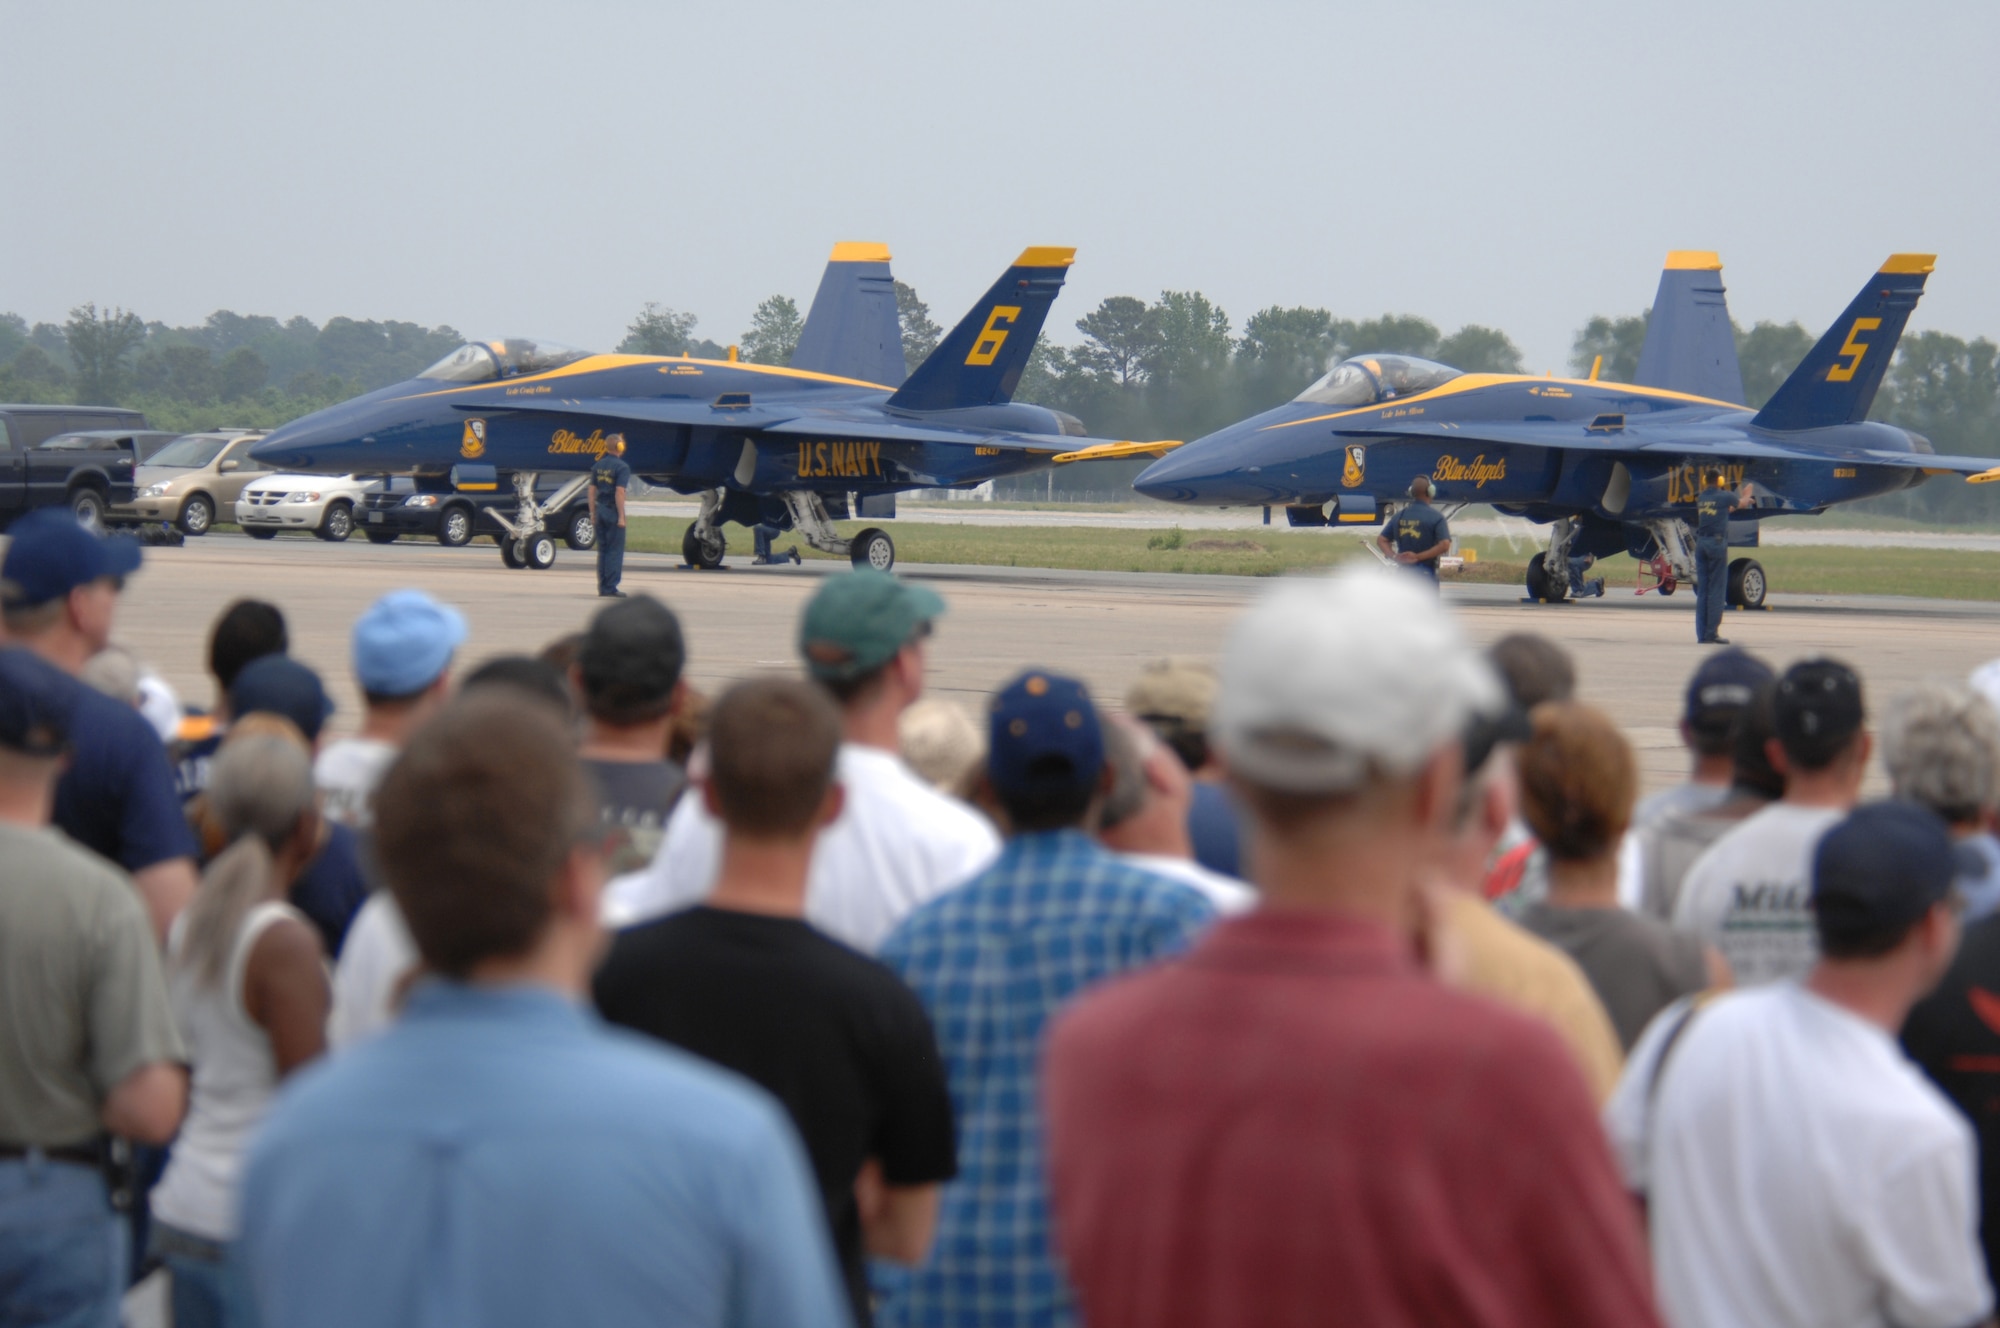 Spectators look on as the Navy Demonstration Team the Blue Angles prepare to taxi, at the Wings Over Wayne Airshow here May 12. The Wings Over Wayne Airshow 2007 is the first apperance of the Blue Angels since the accident that occurred April 21.(U.S. Air Force photo by Airman 1st Class Greg Biondo)(released)